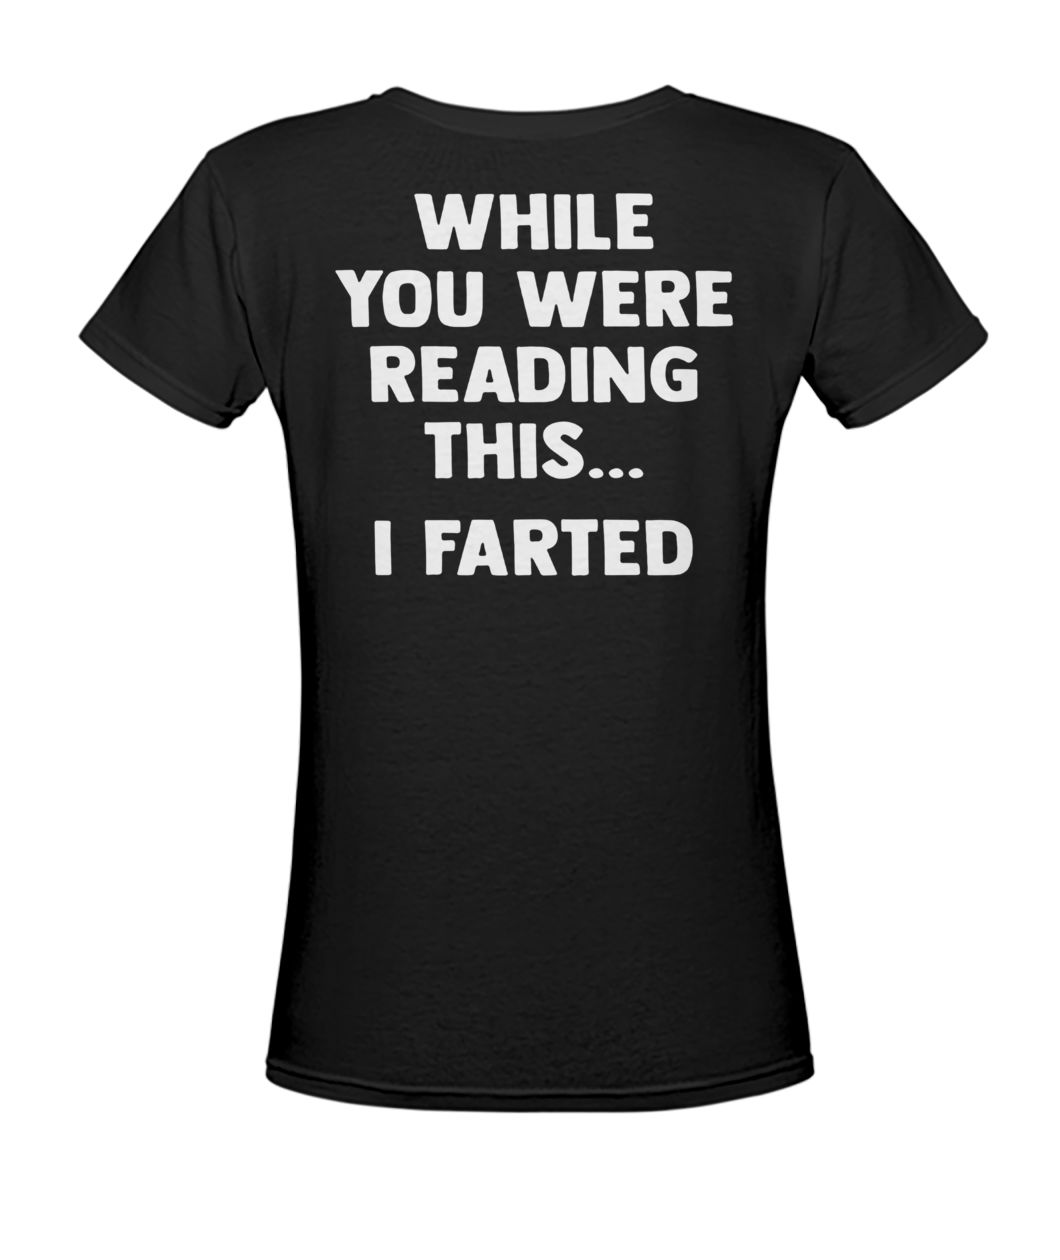 While you were reading this I farted women's v-neck